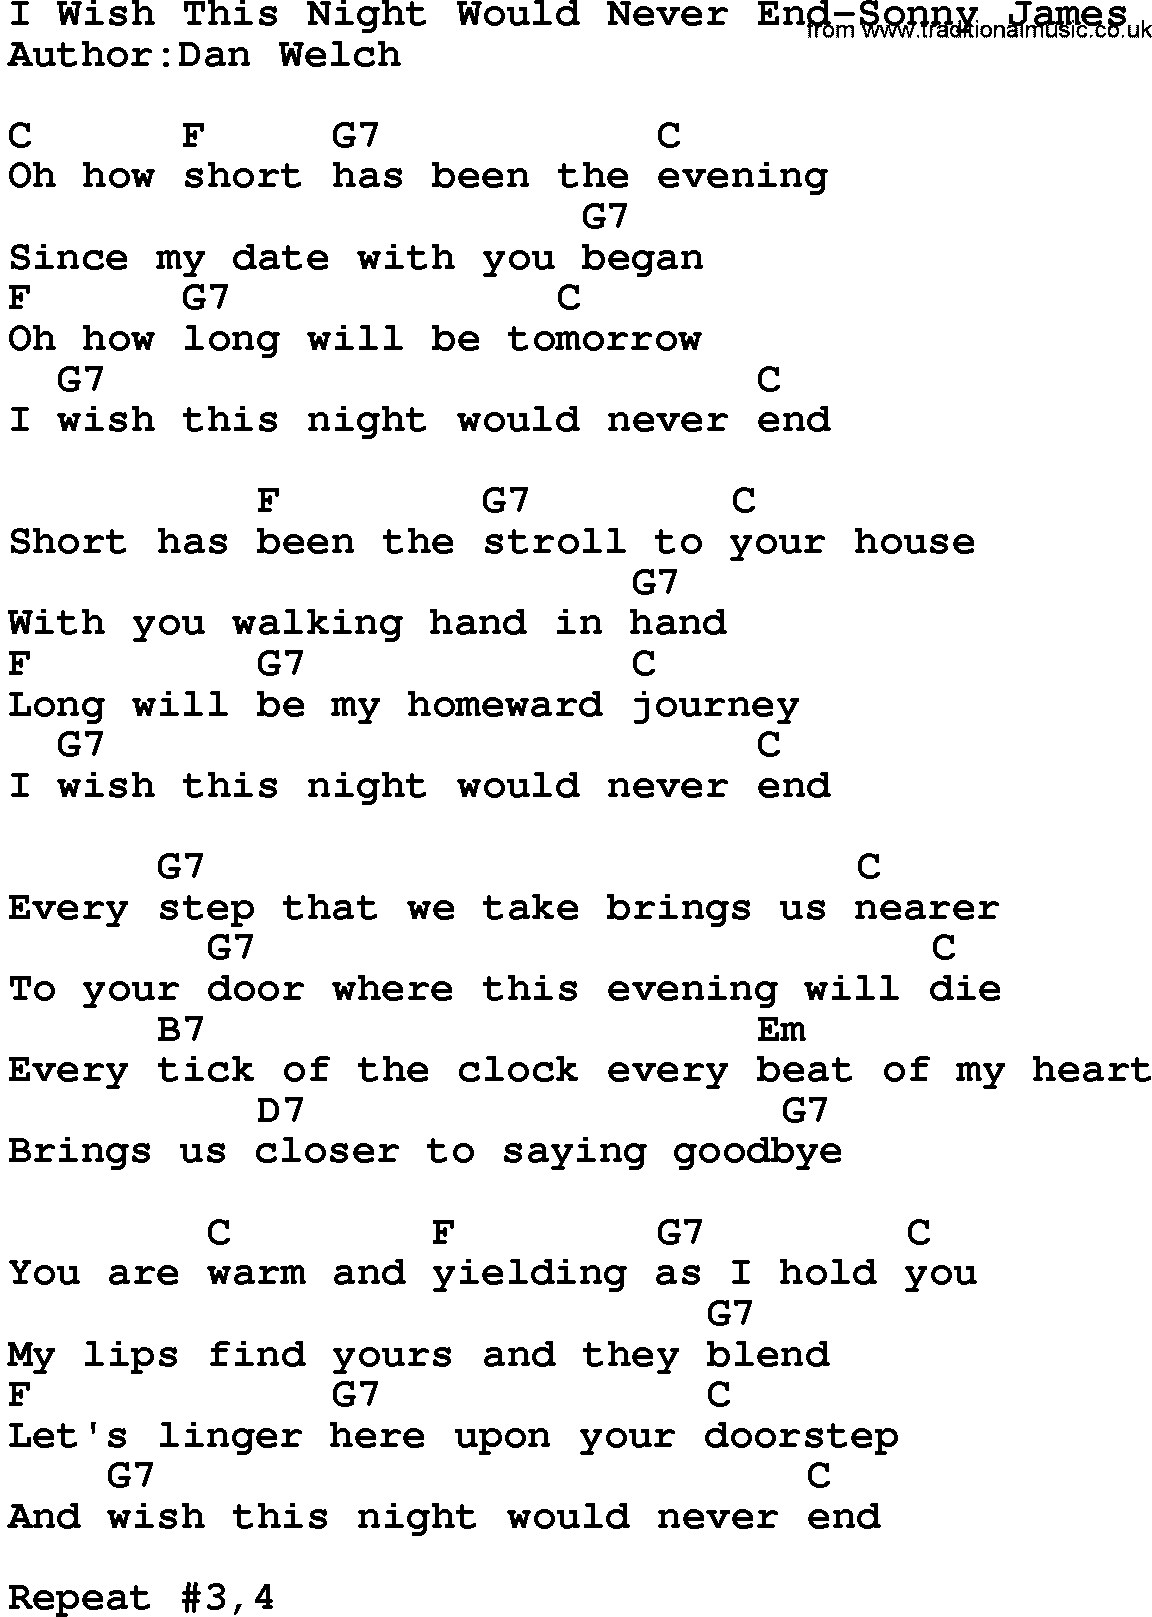 Country music song: I Wish This Night Would Never End-Sonny James lyrics and chords